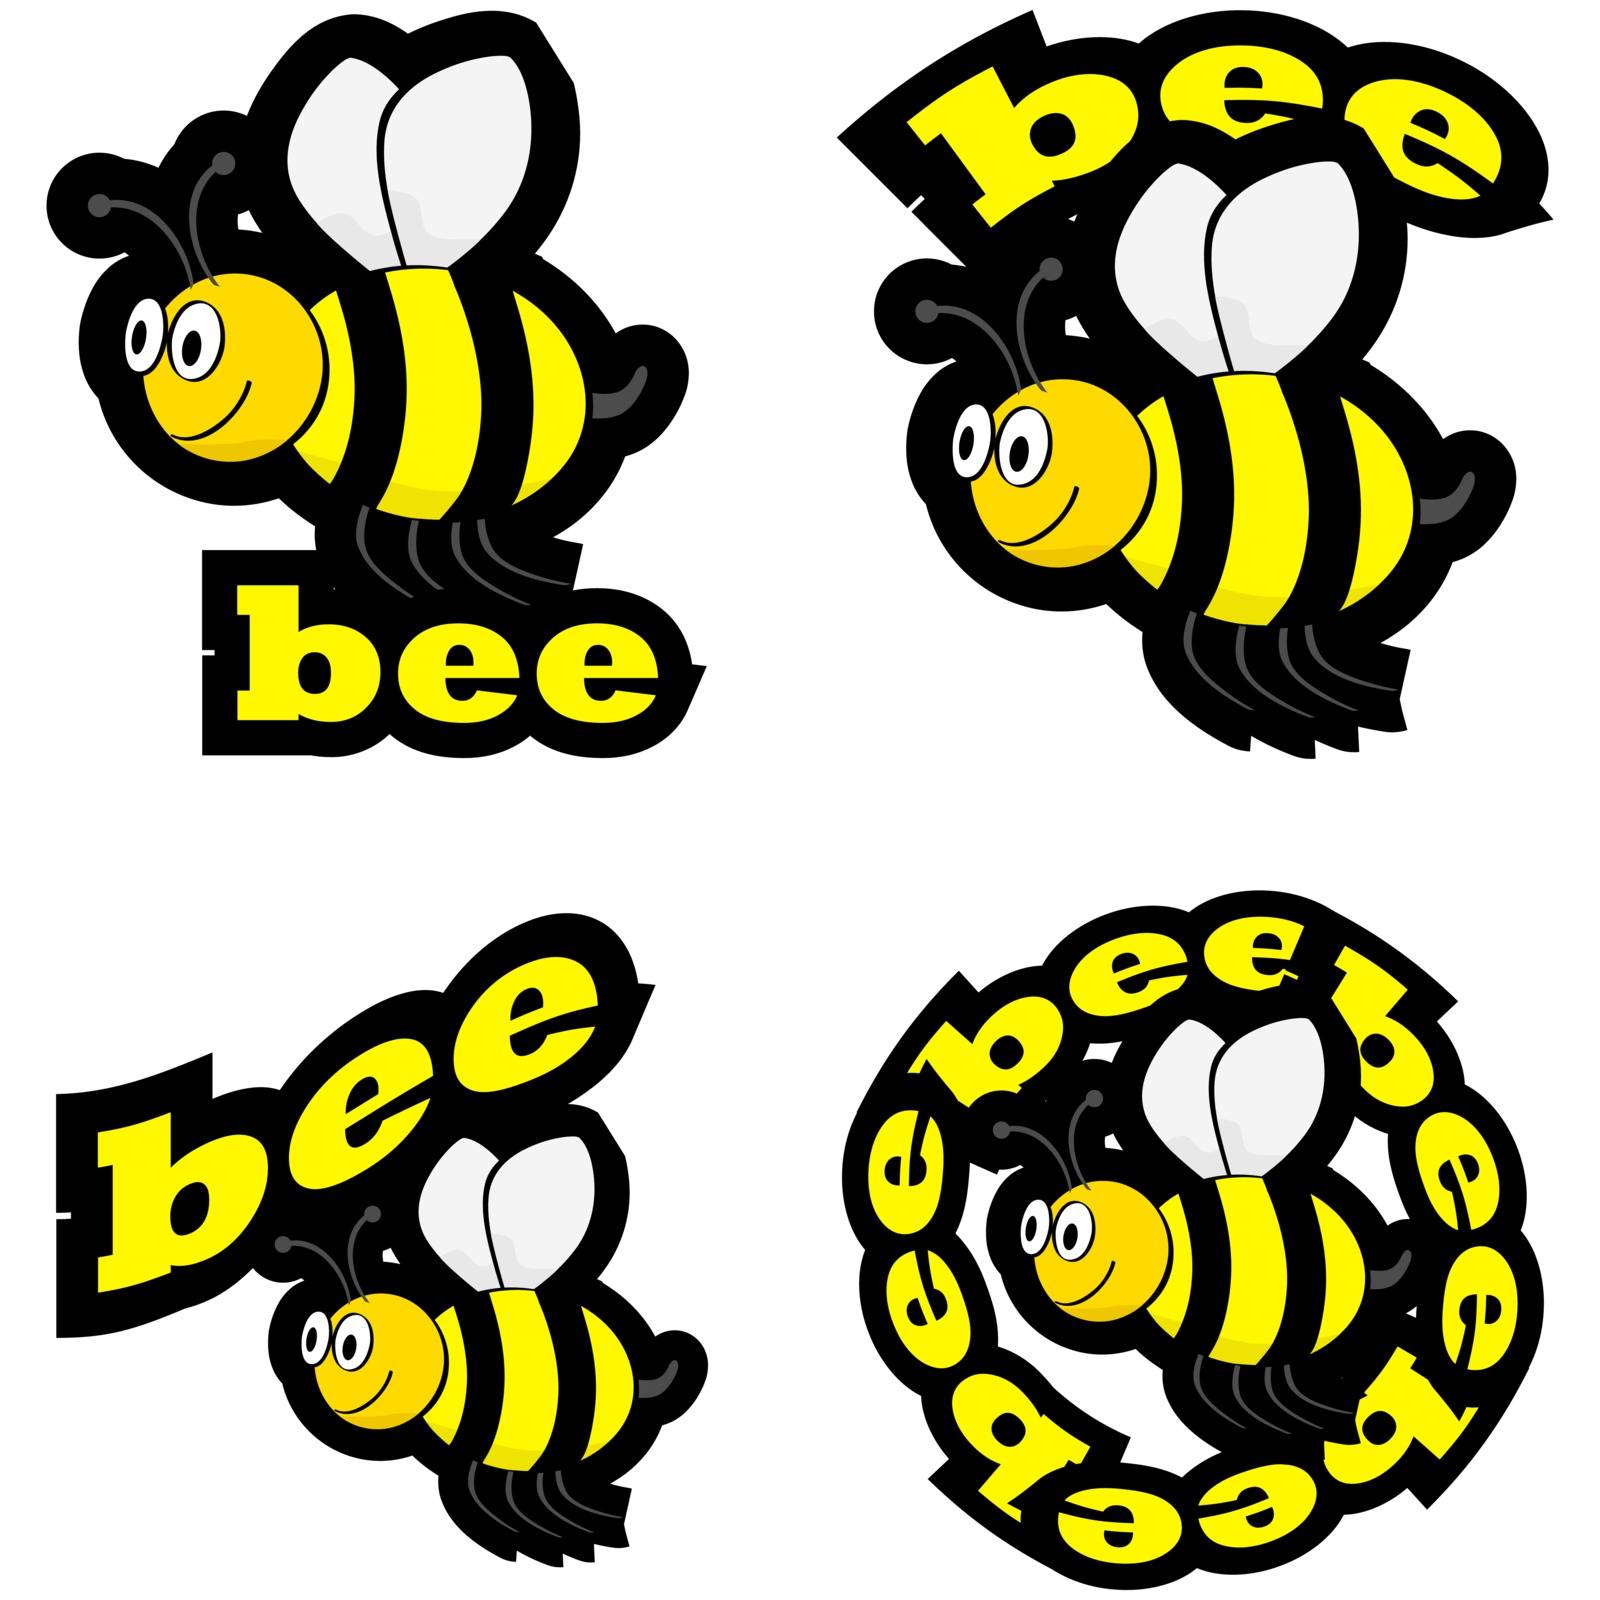 Icon set showing a cartoon bee flying, combined with different representations of the word bee